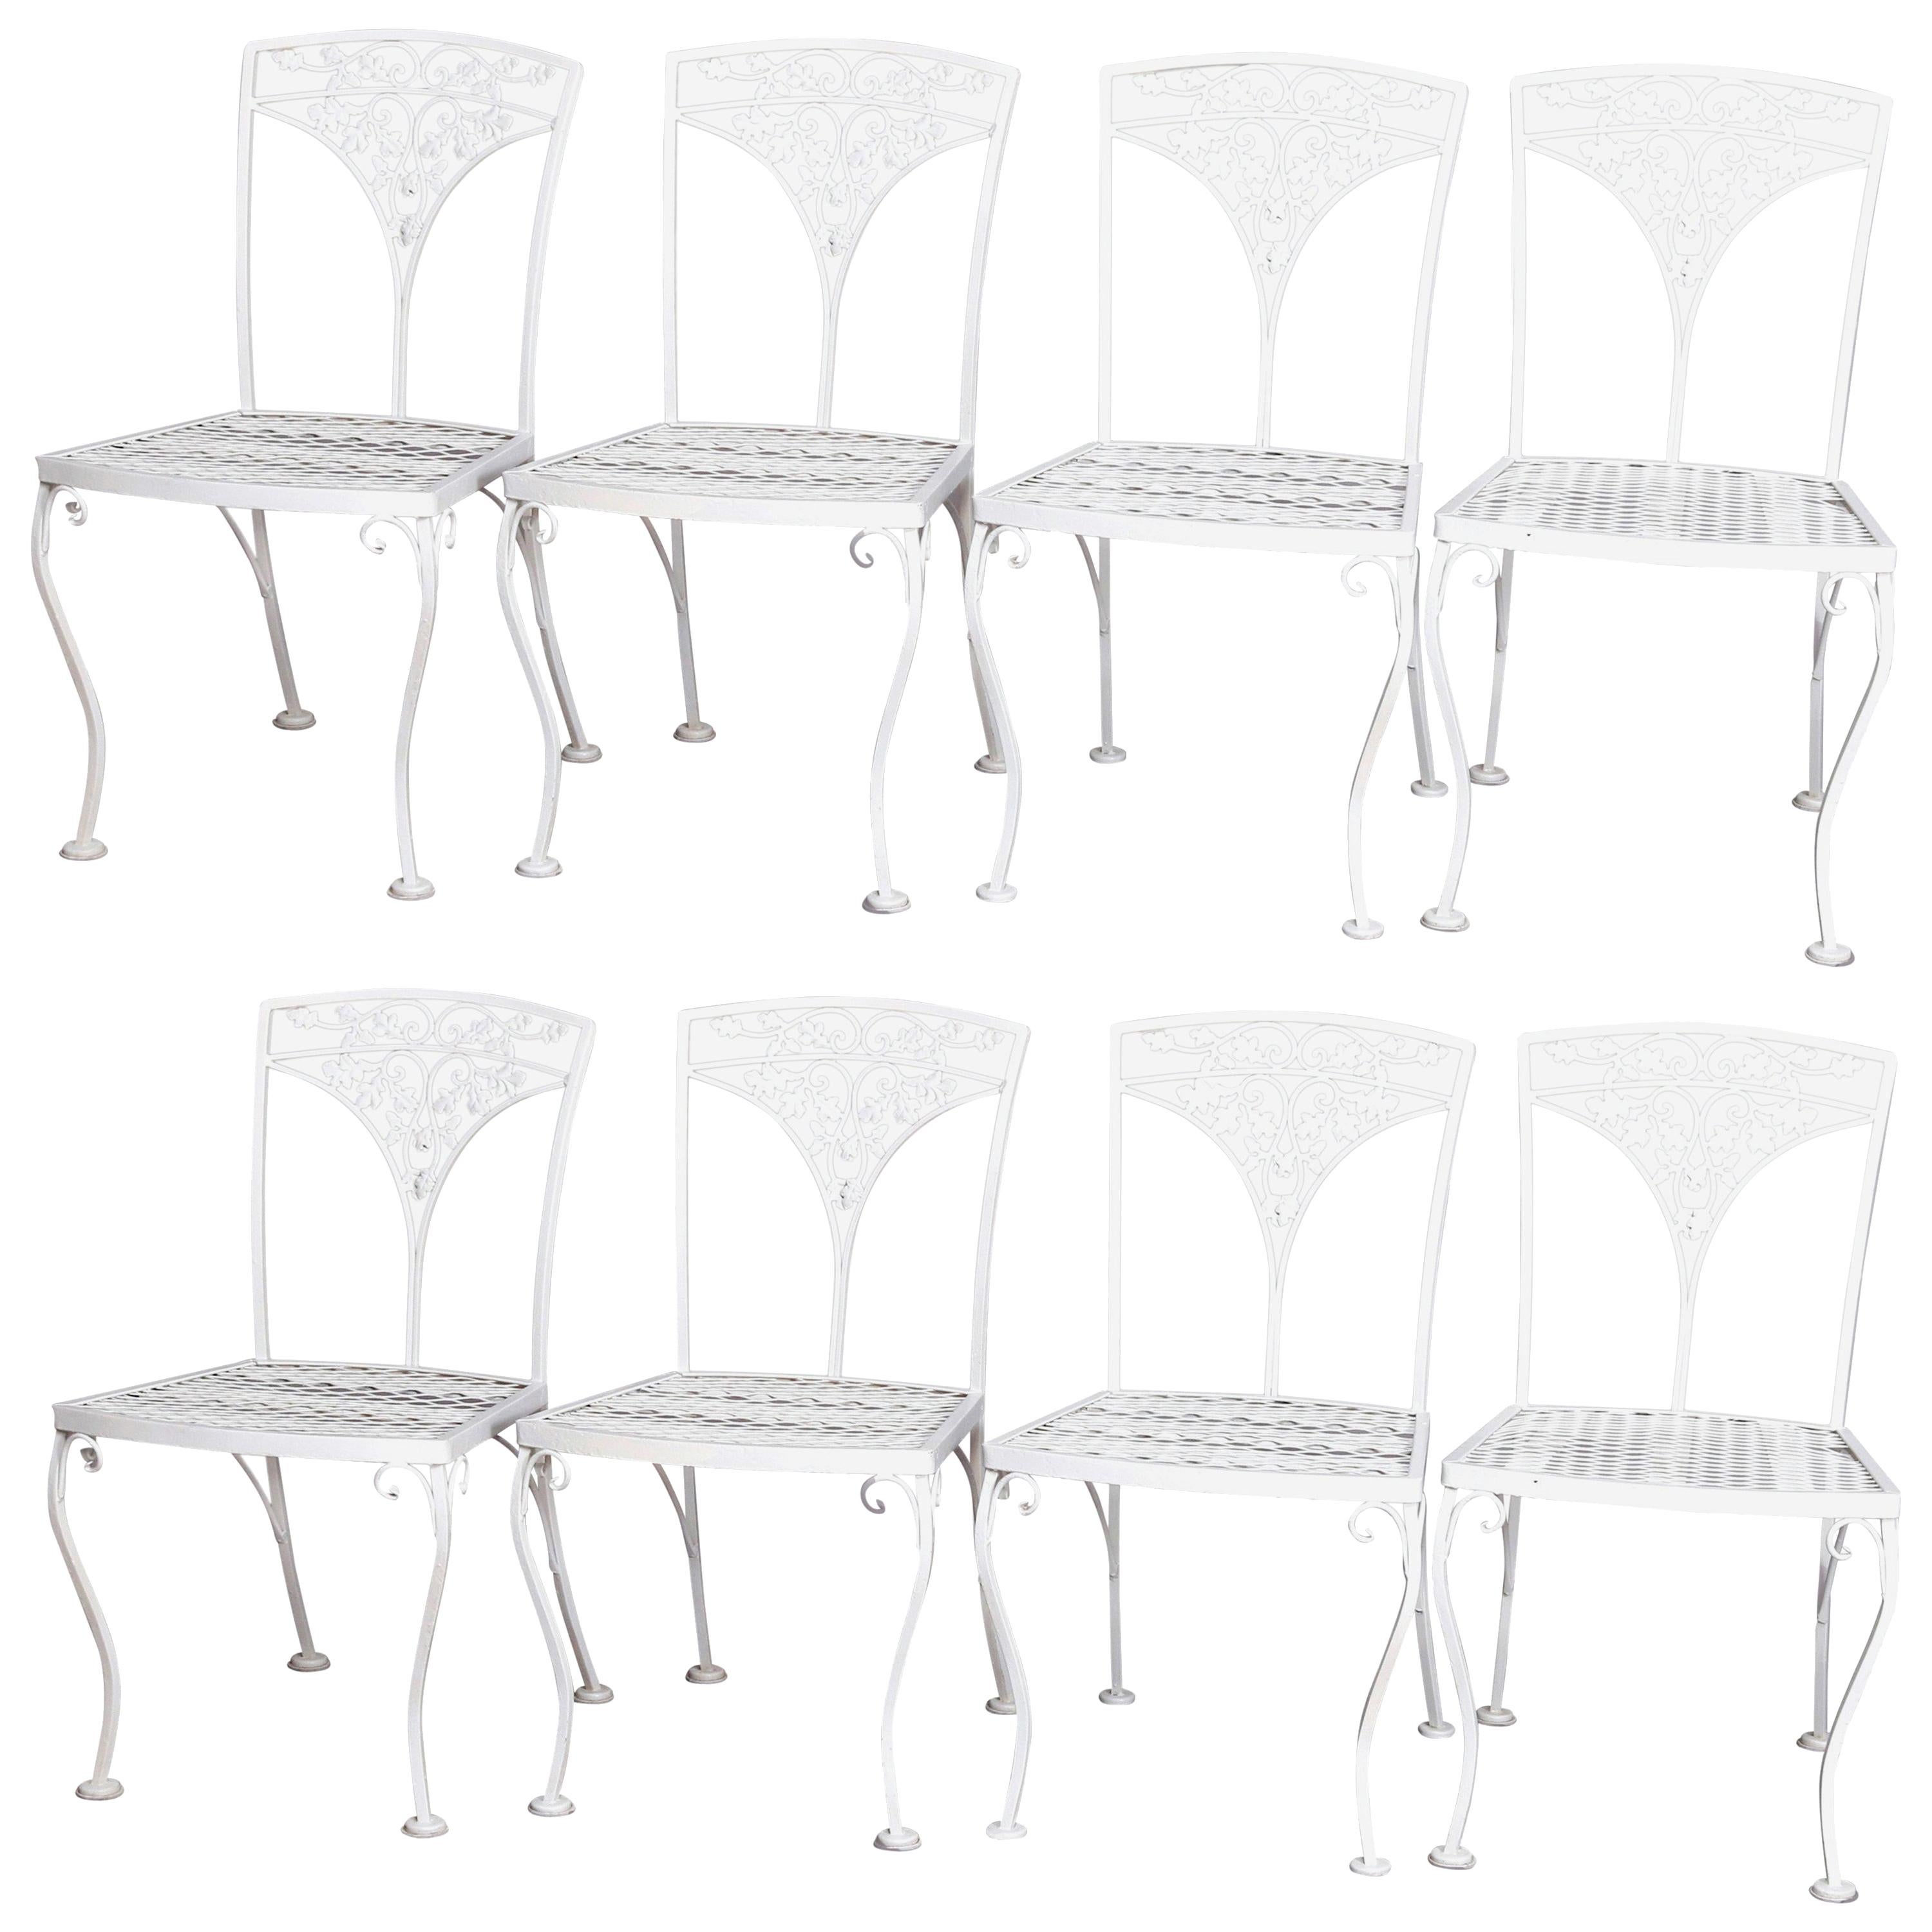 8 Victorian Style Wrought Iron Foliate Form White Painted Patio Chairs